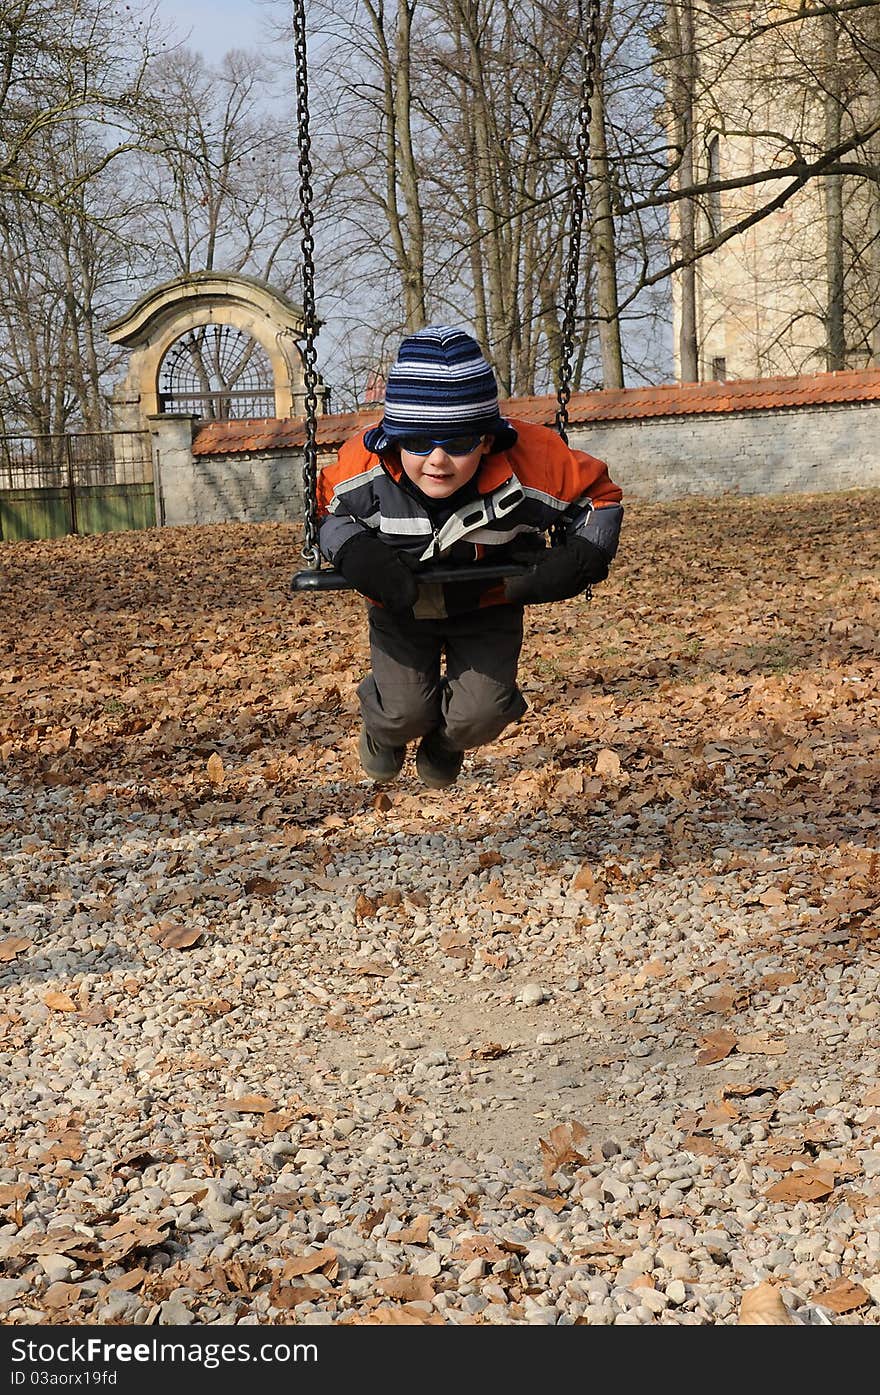 Young child with sunglasses swinging on a chain swing in a playground. Young child with sunglasses swinging on a chain swing in a playground